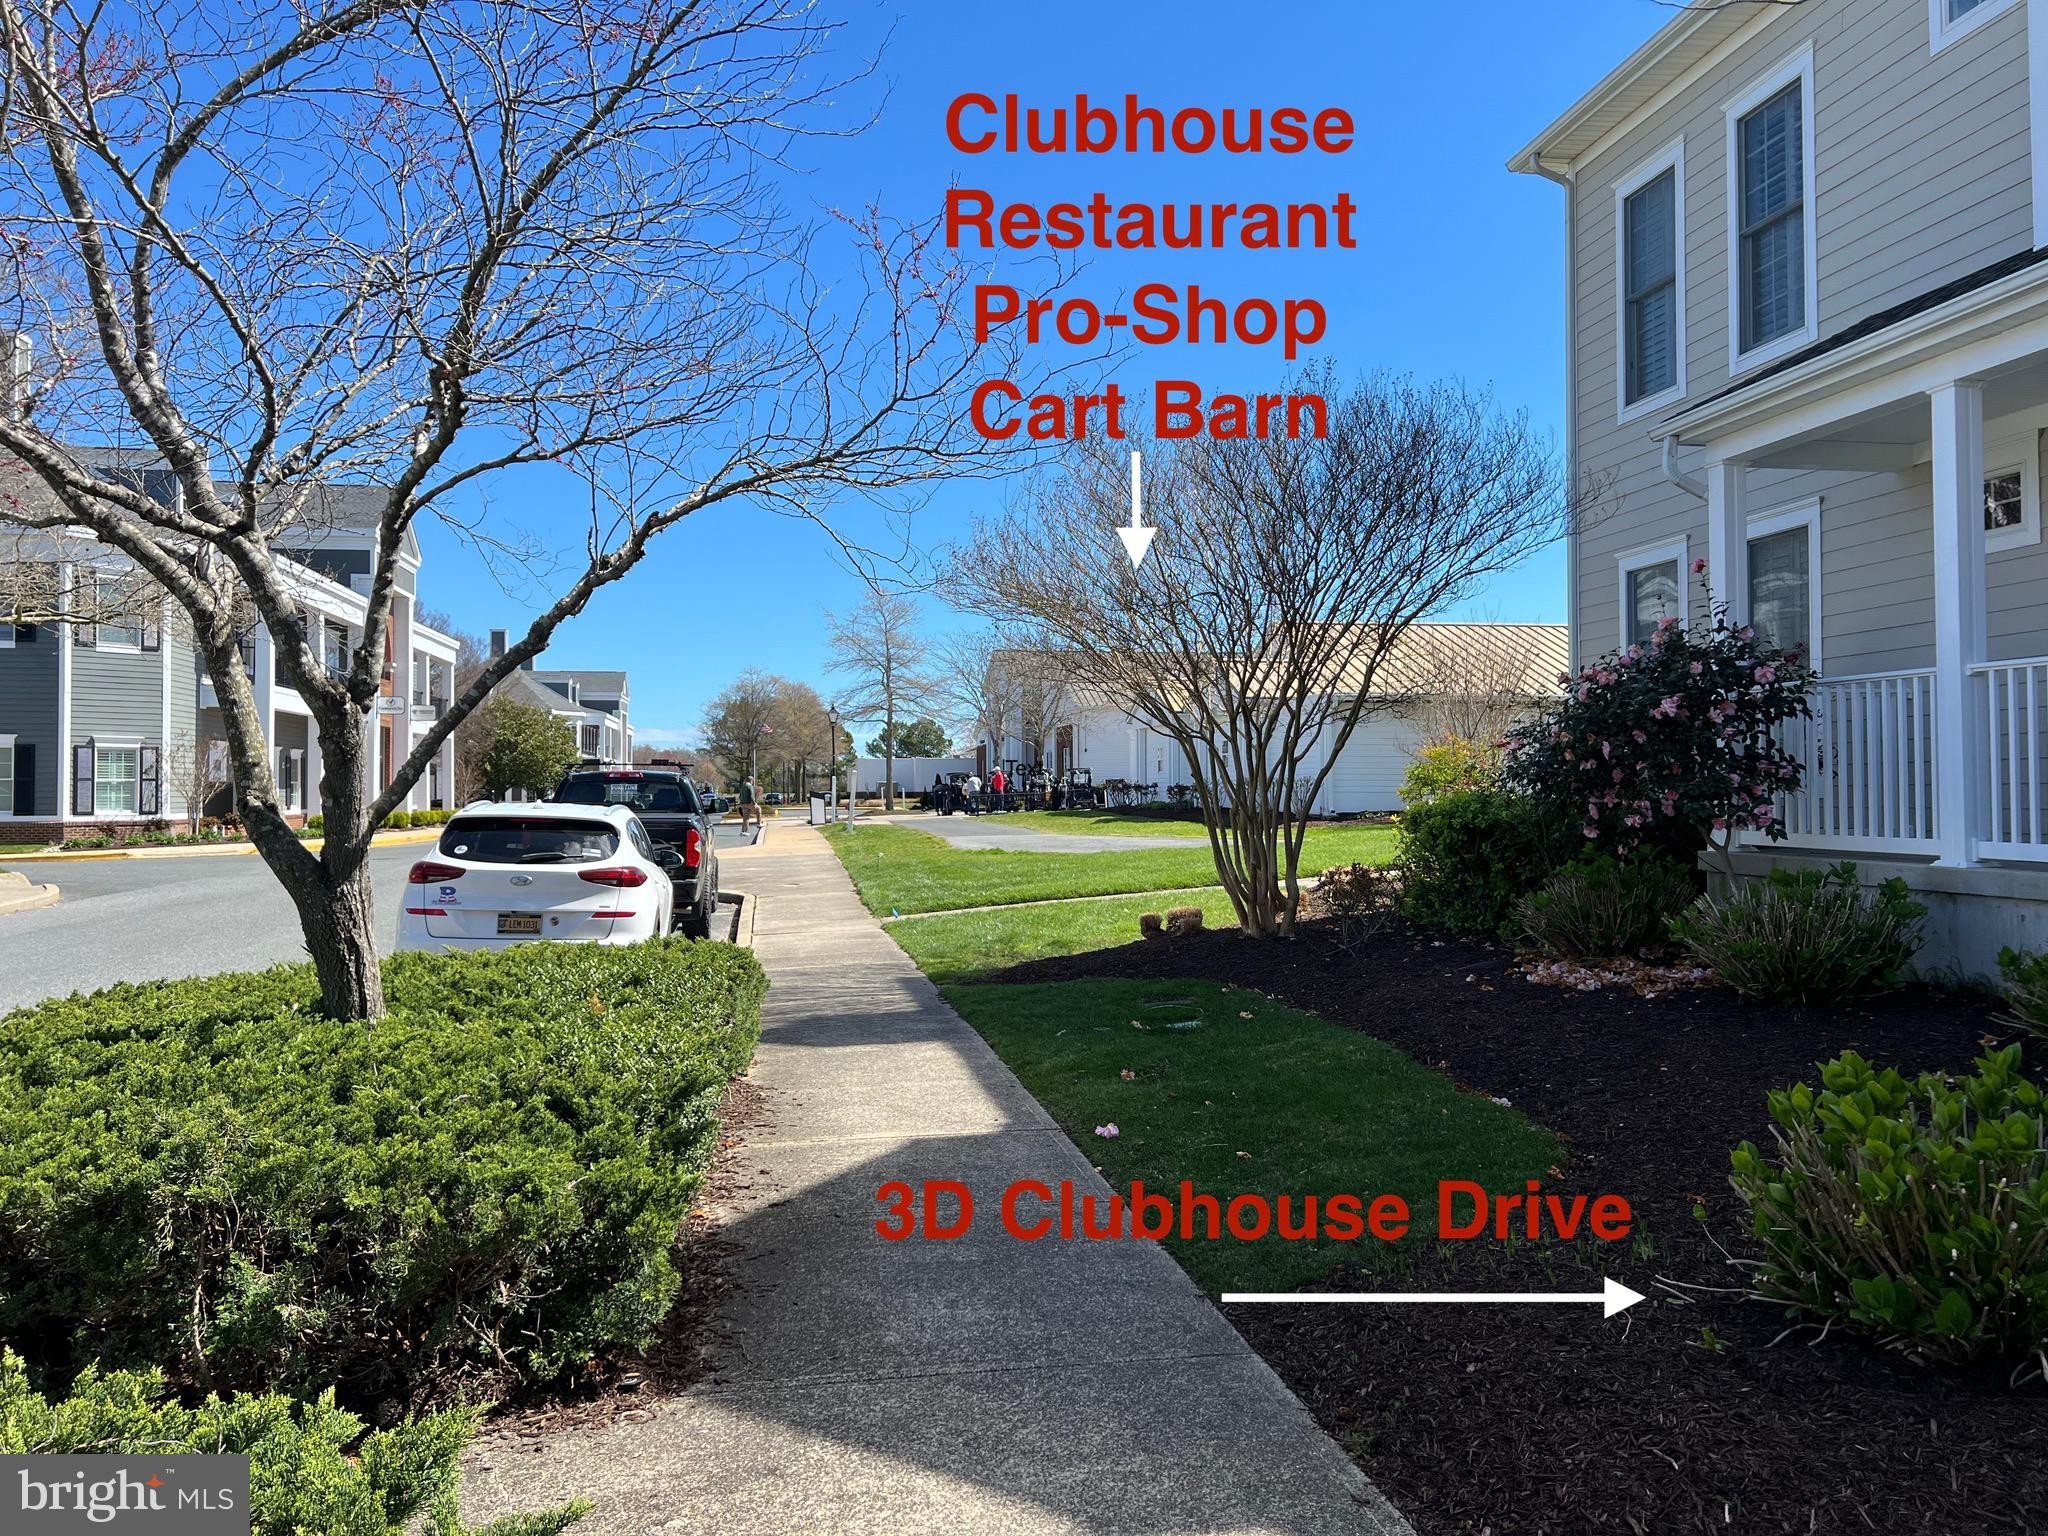 41. 3d Clubhouse Drive